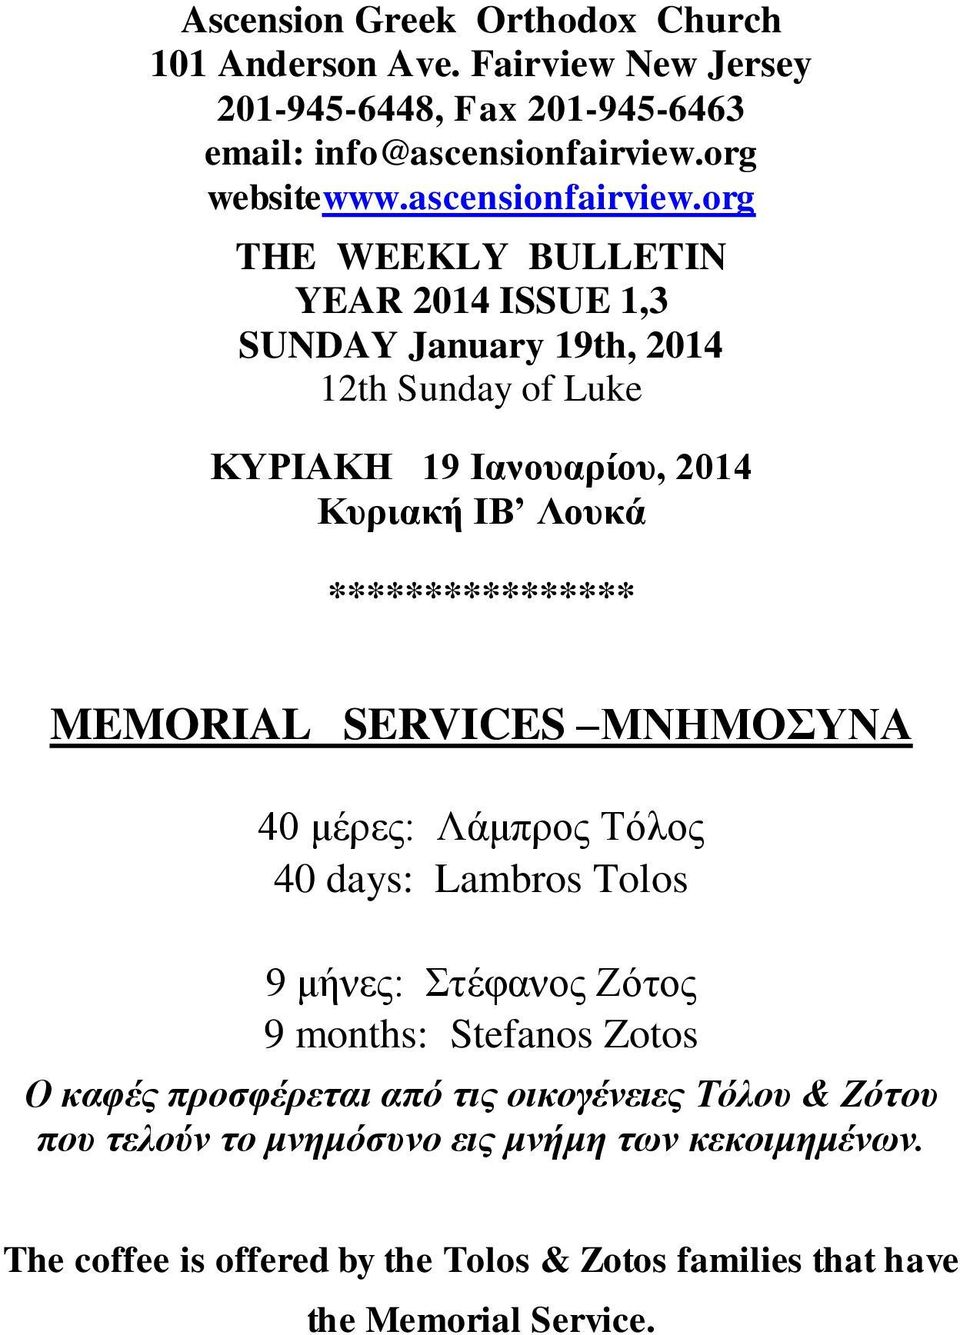 org THE WEEKLY BULLETIN YEAR 2014 ISSUE 1,3 SUNDAY January 19th, 2014 ΚΥΡΙΑΚΗ 19 Ιανουαρίου, 2014 Κυριακή ΙΒ Λουκά **************** MEMORIAL SERVICES